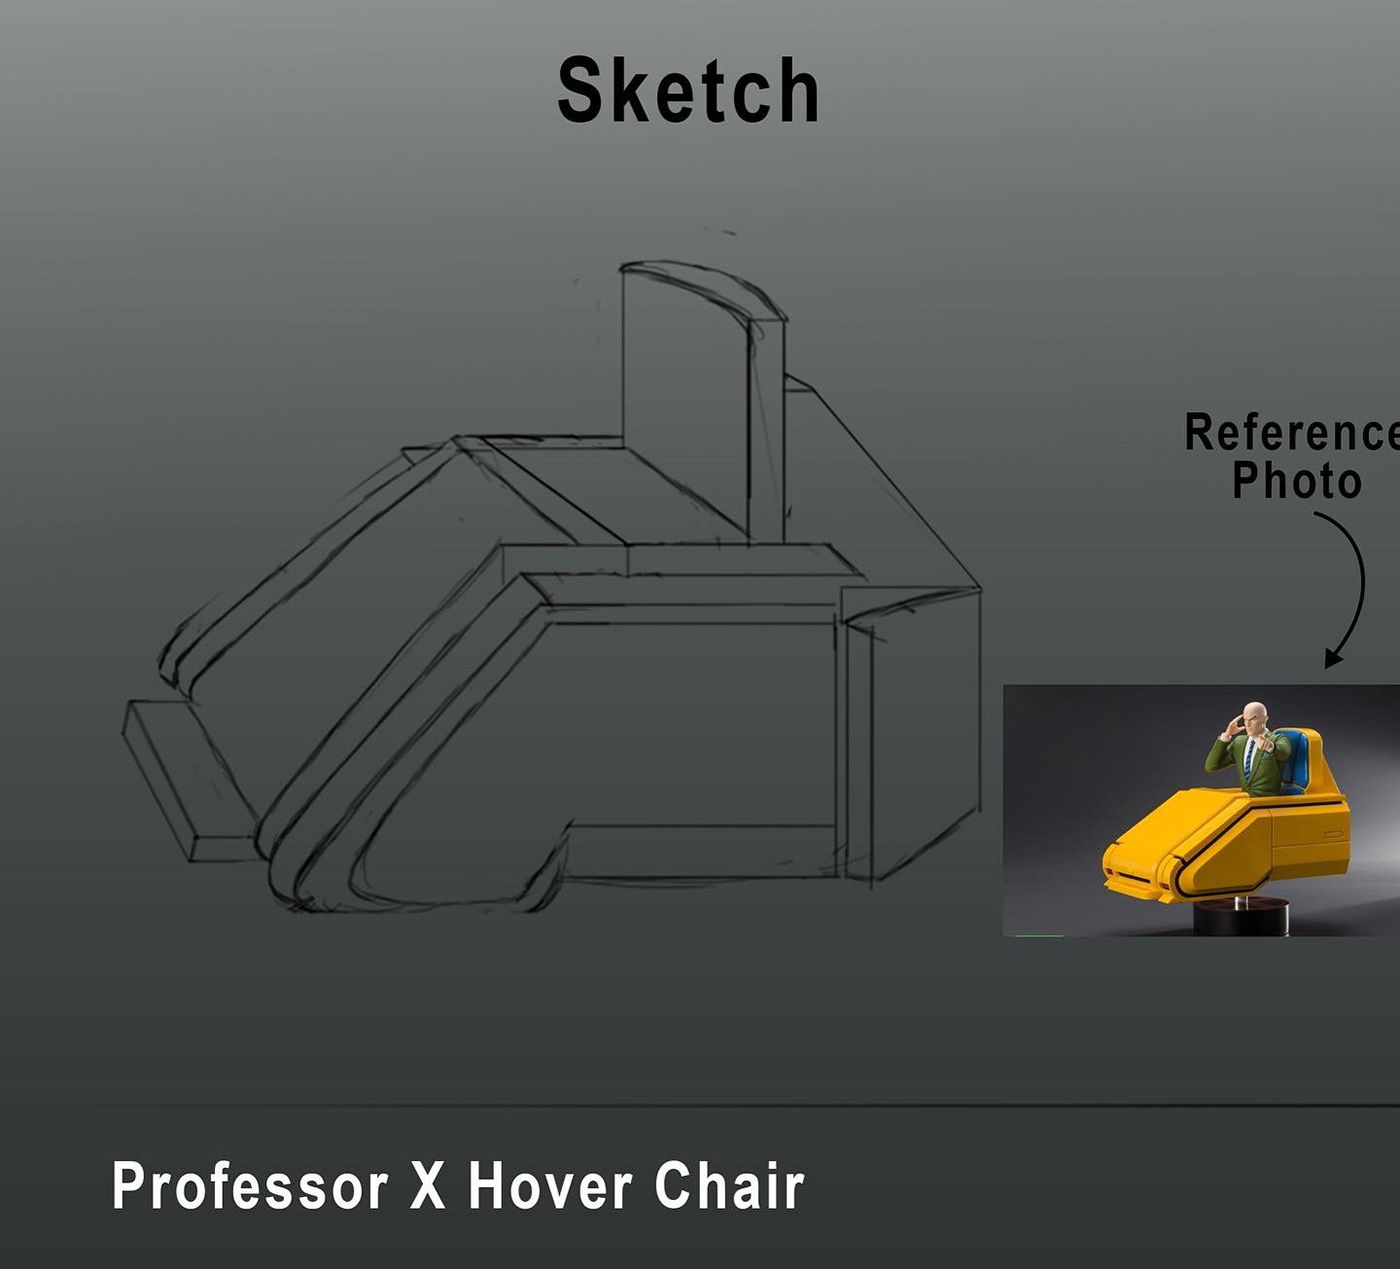 Professor X Hover Chair